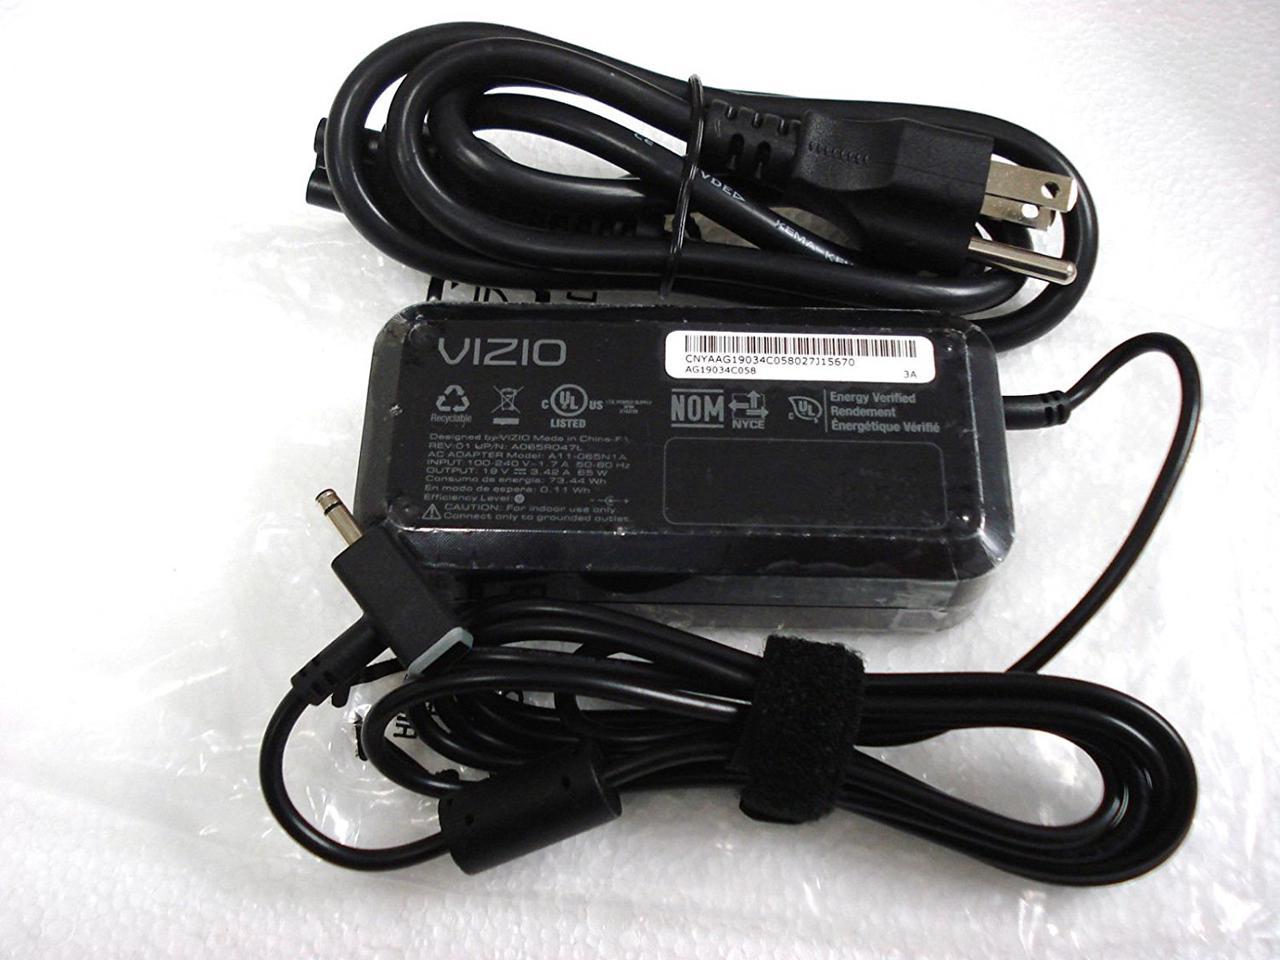 AC Adapter for Vizio CT14-A0 CT14-A1 Ultrabook Laptop Charger Power CT15 Supply 